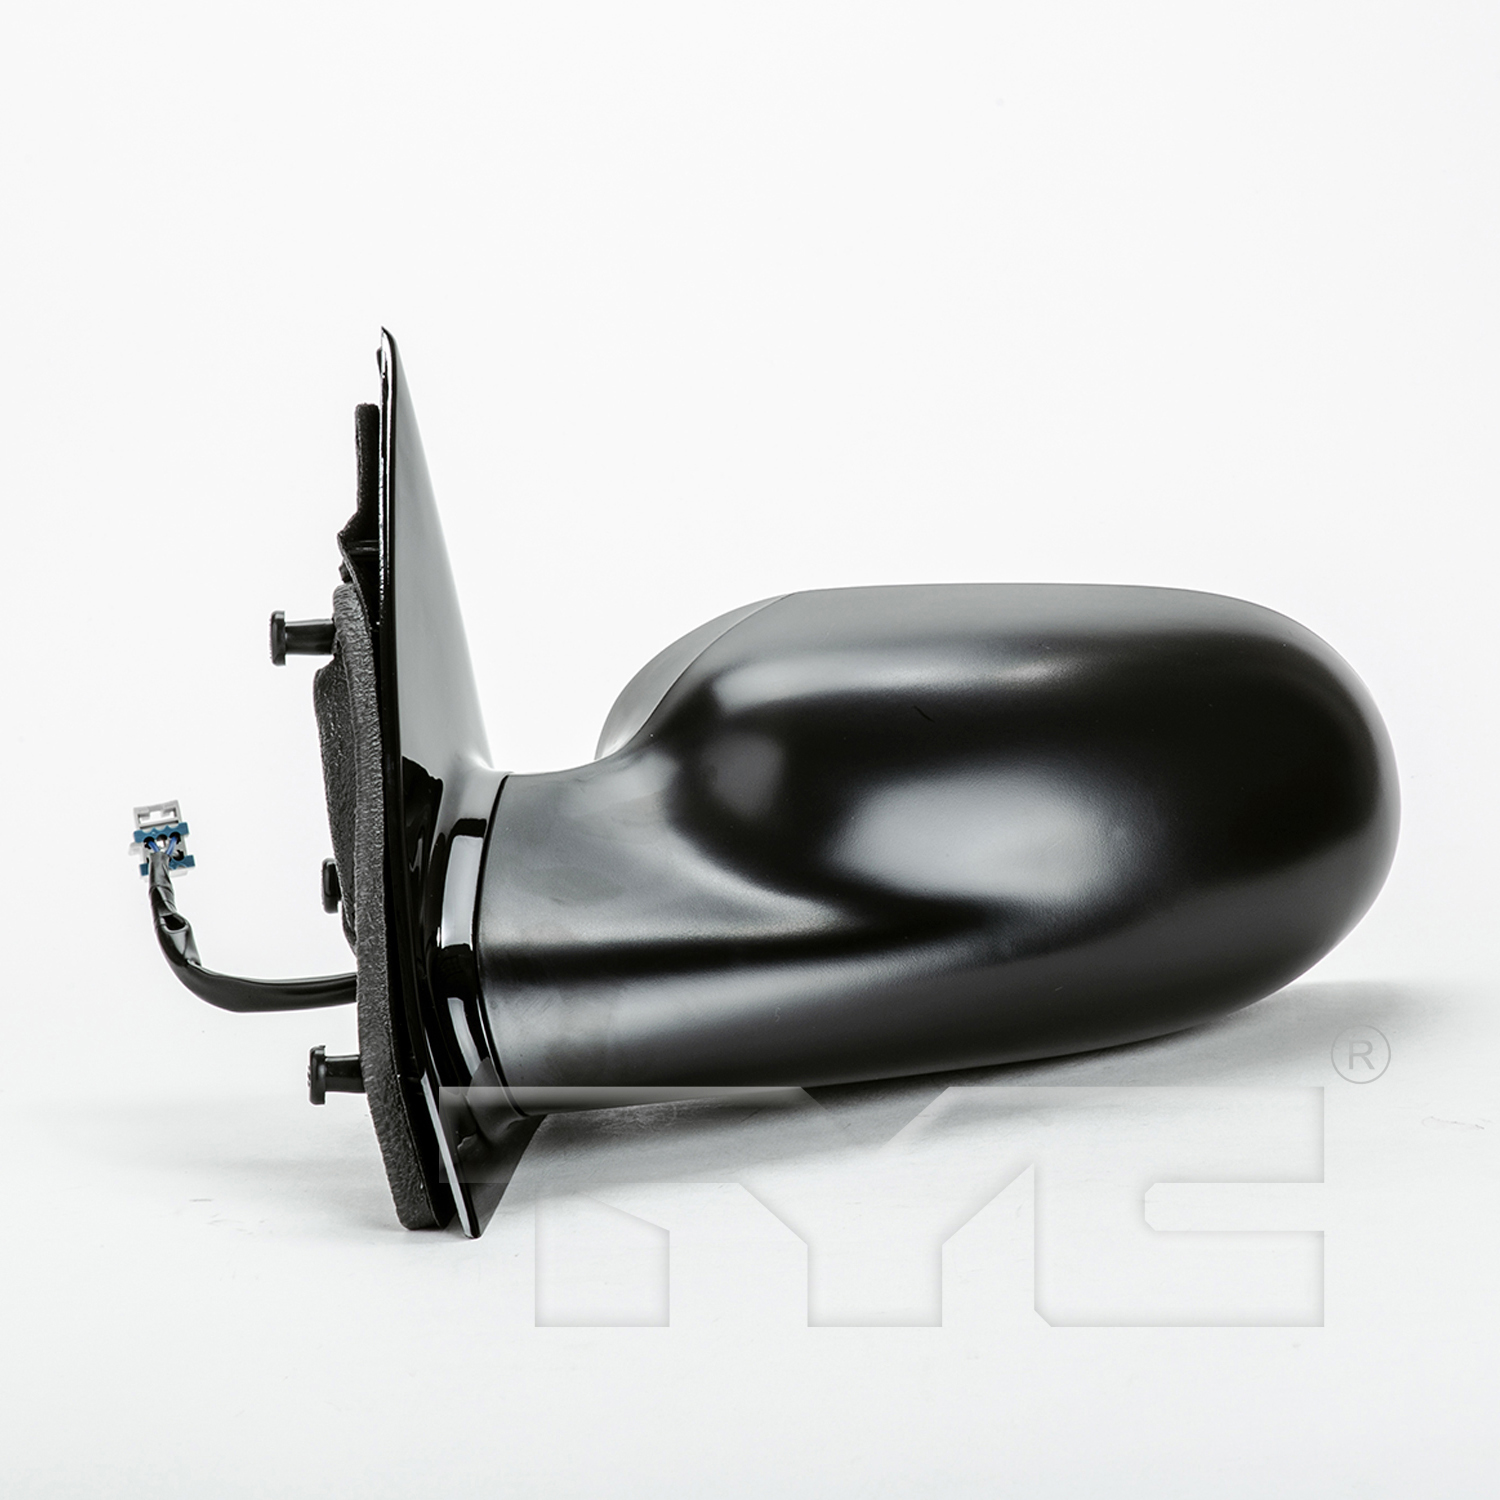 Aftermarket MIRRORS for SATURN - L200, L200,01-03,LT Mirror outside rear view